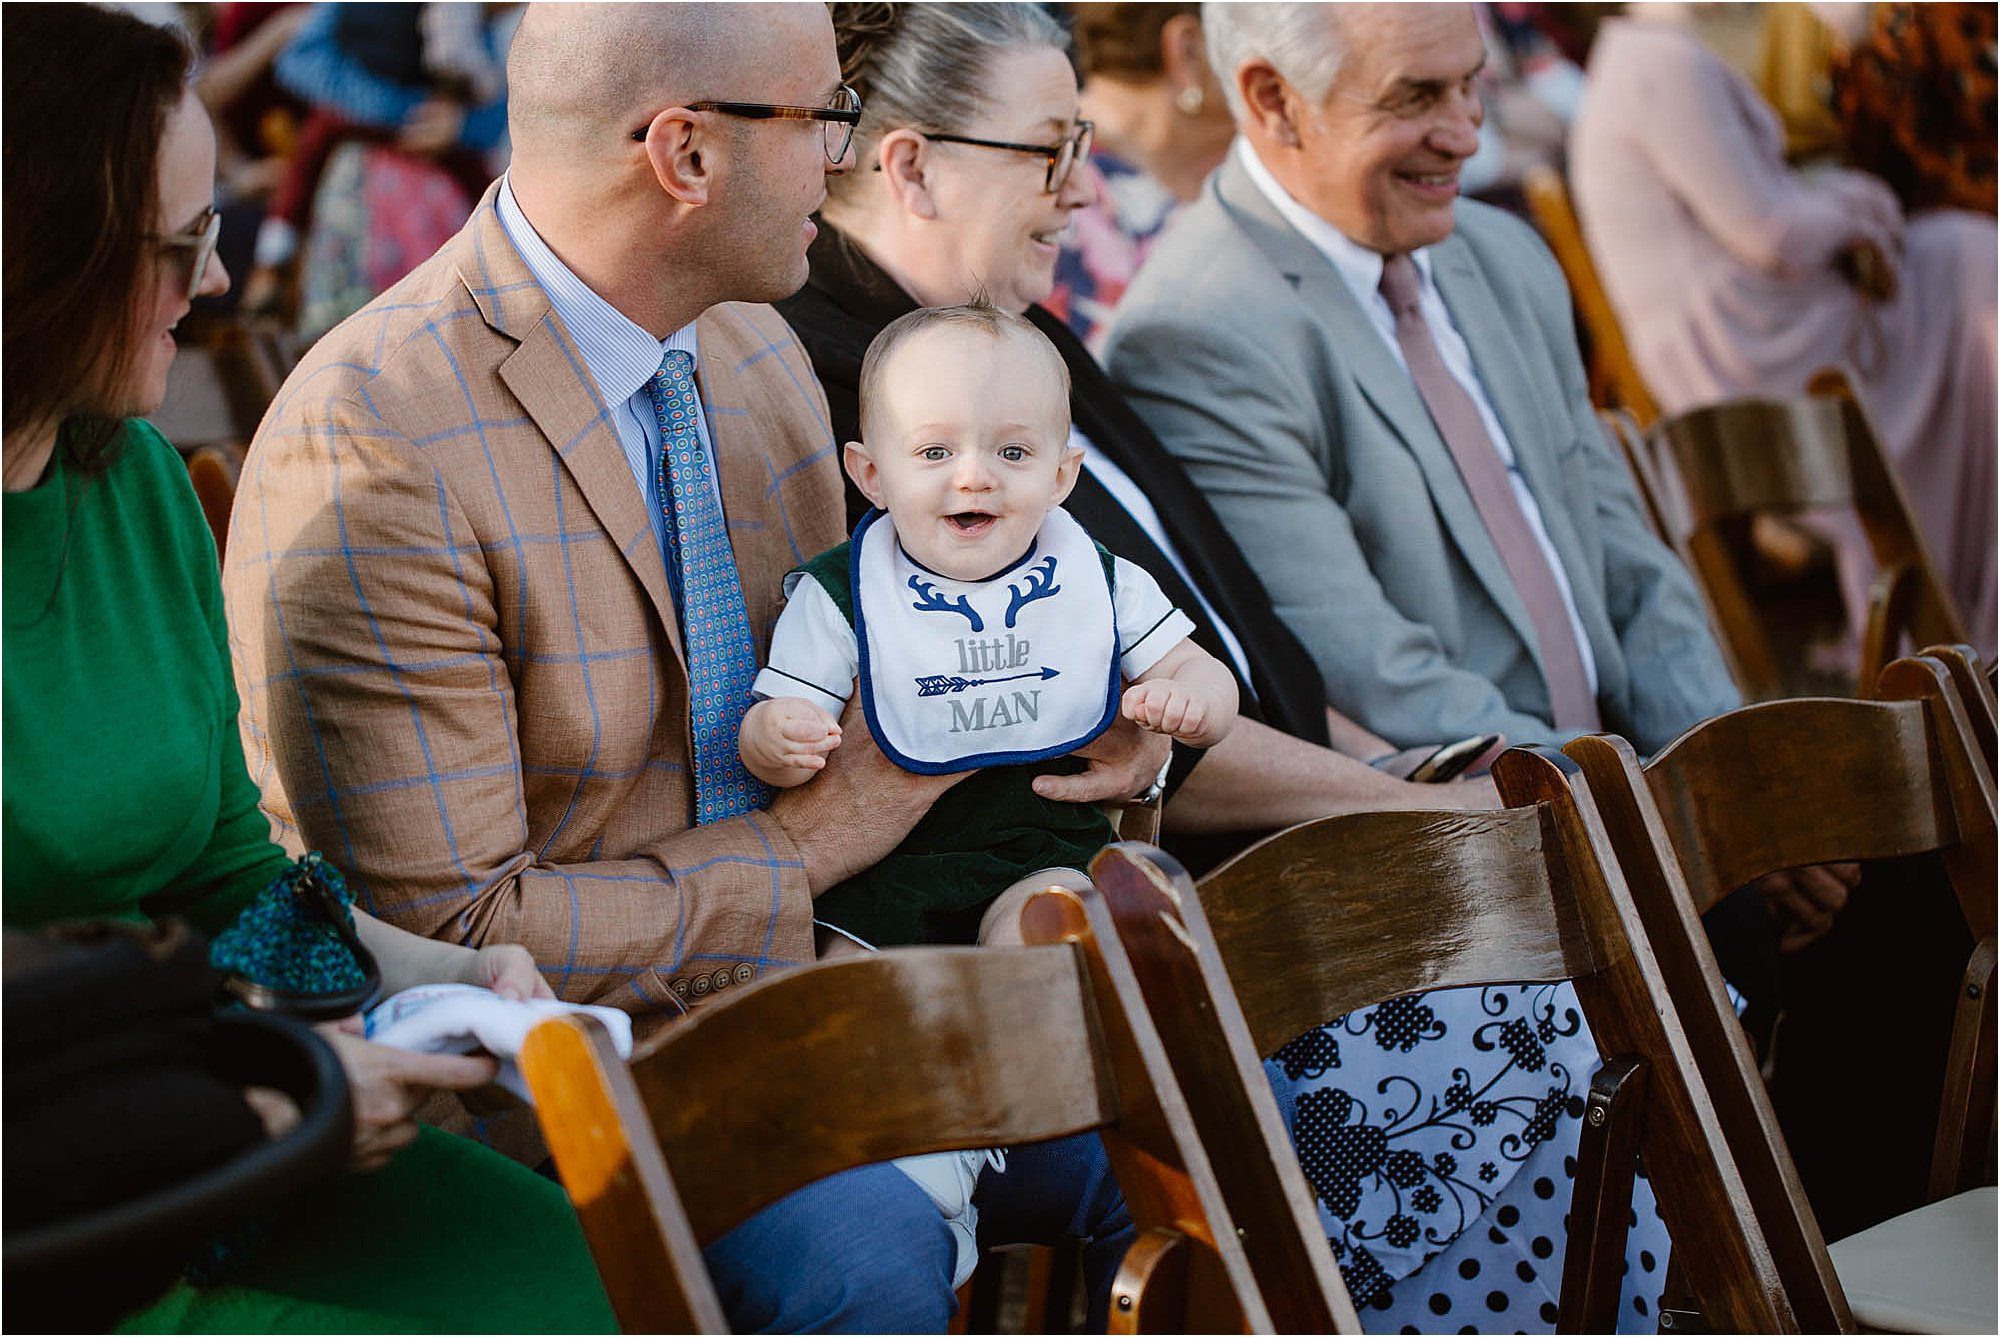 baby sitting on adult's lap at wedding ceremony